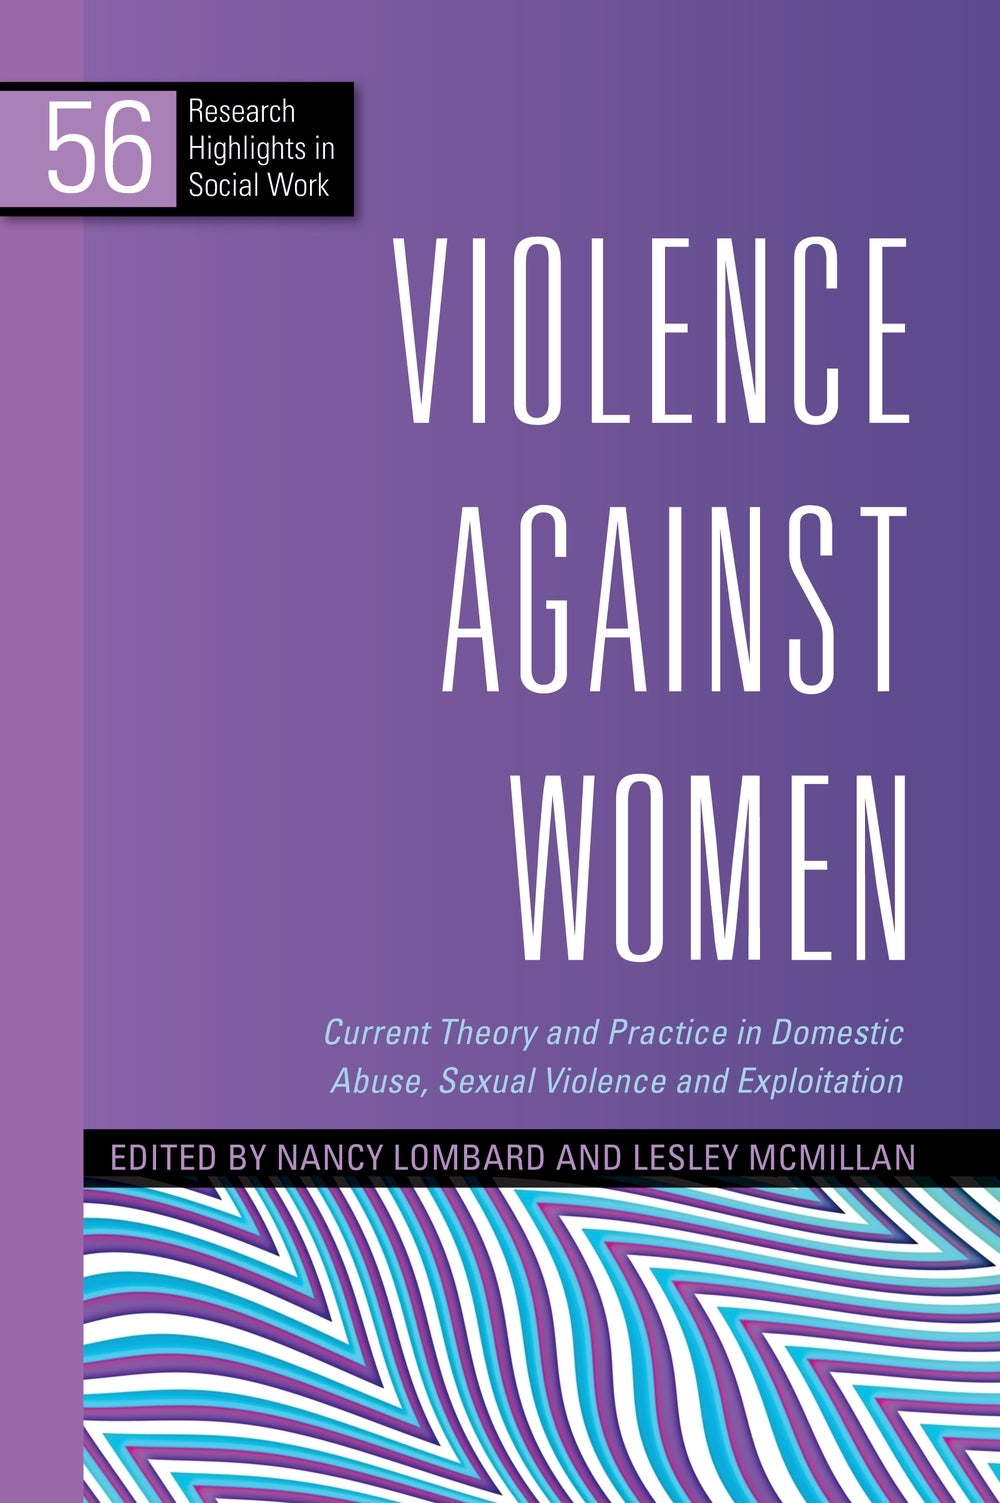 Violence Against Women by Nancy Lombard, Lesley McMillan, No Author Listed